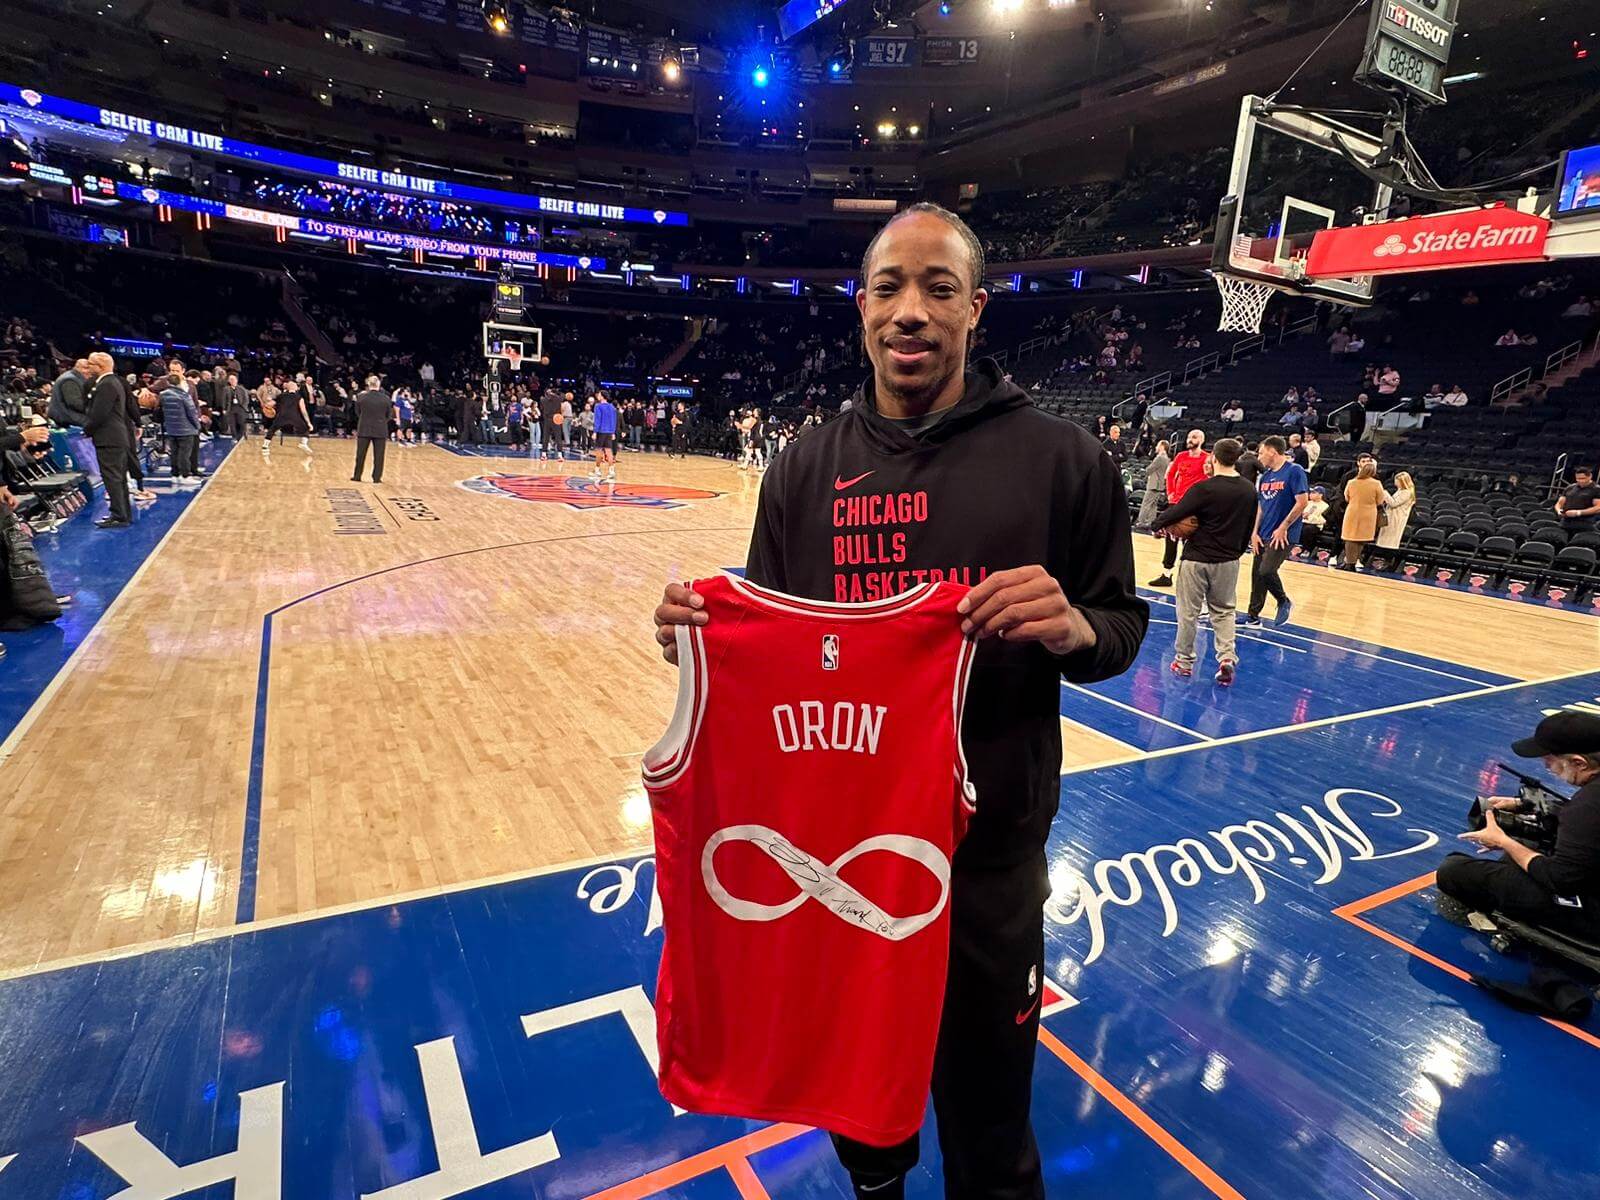 DeMar DeRozan displays the jersey he signed at Madison Square Garden.